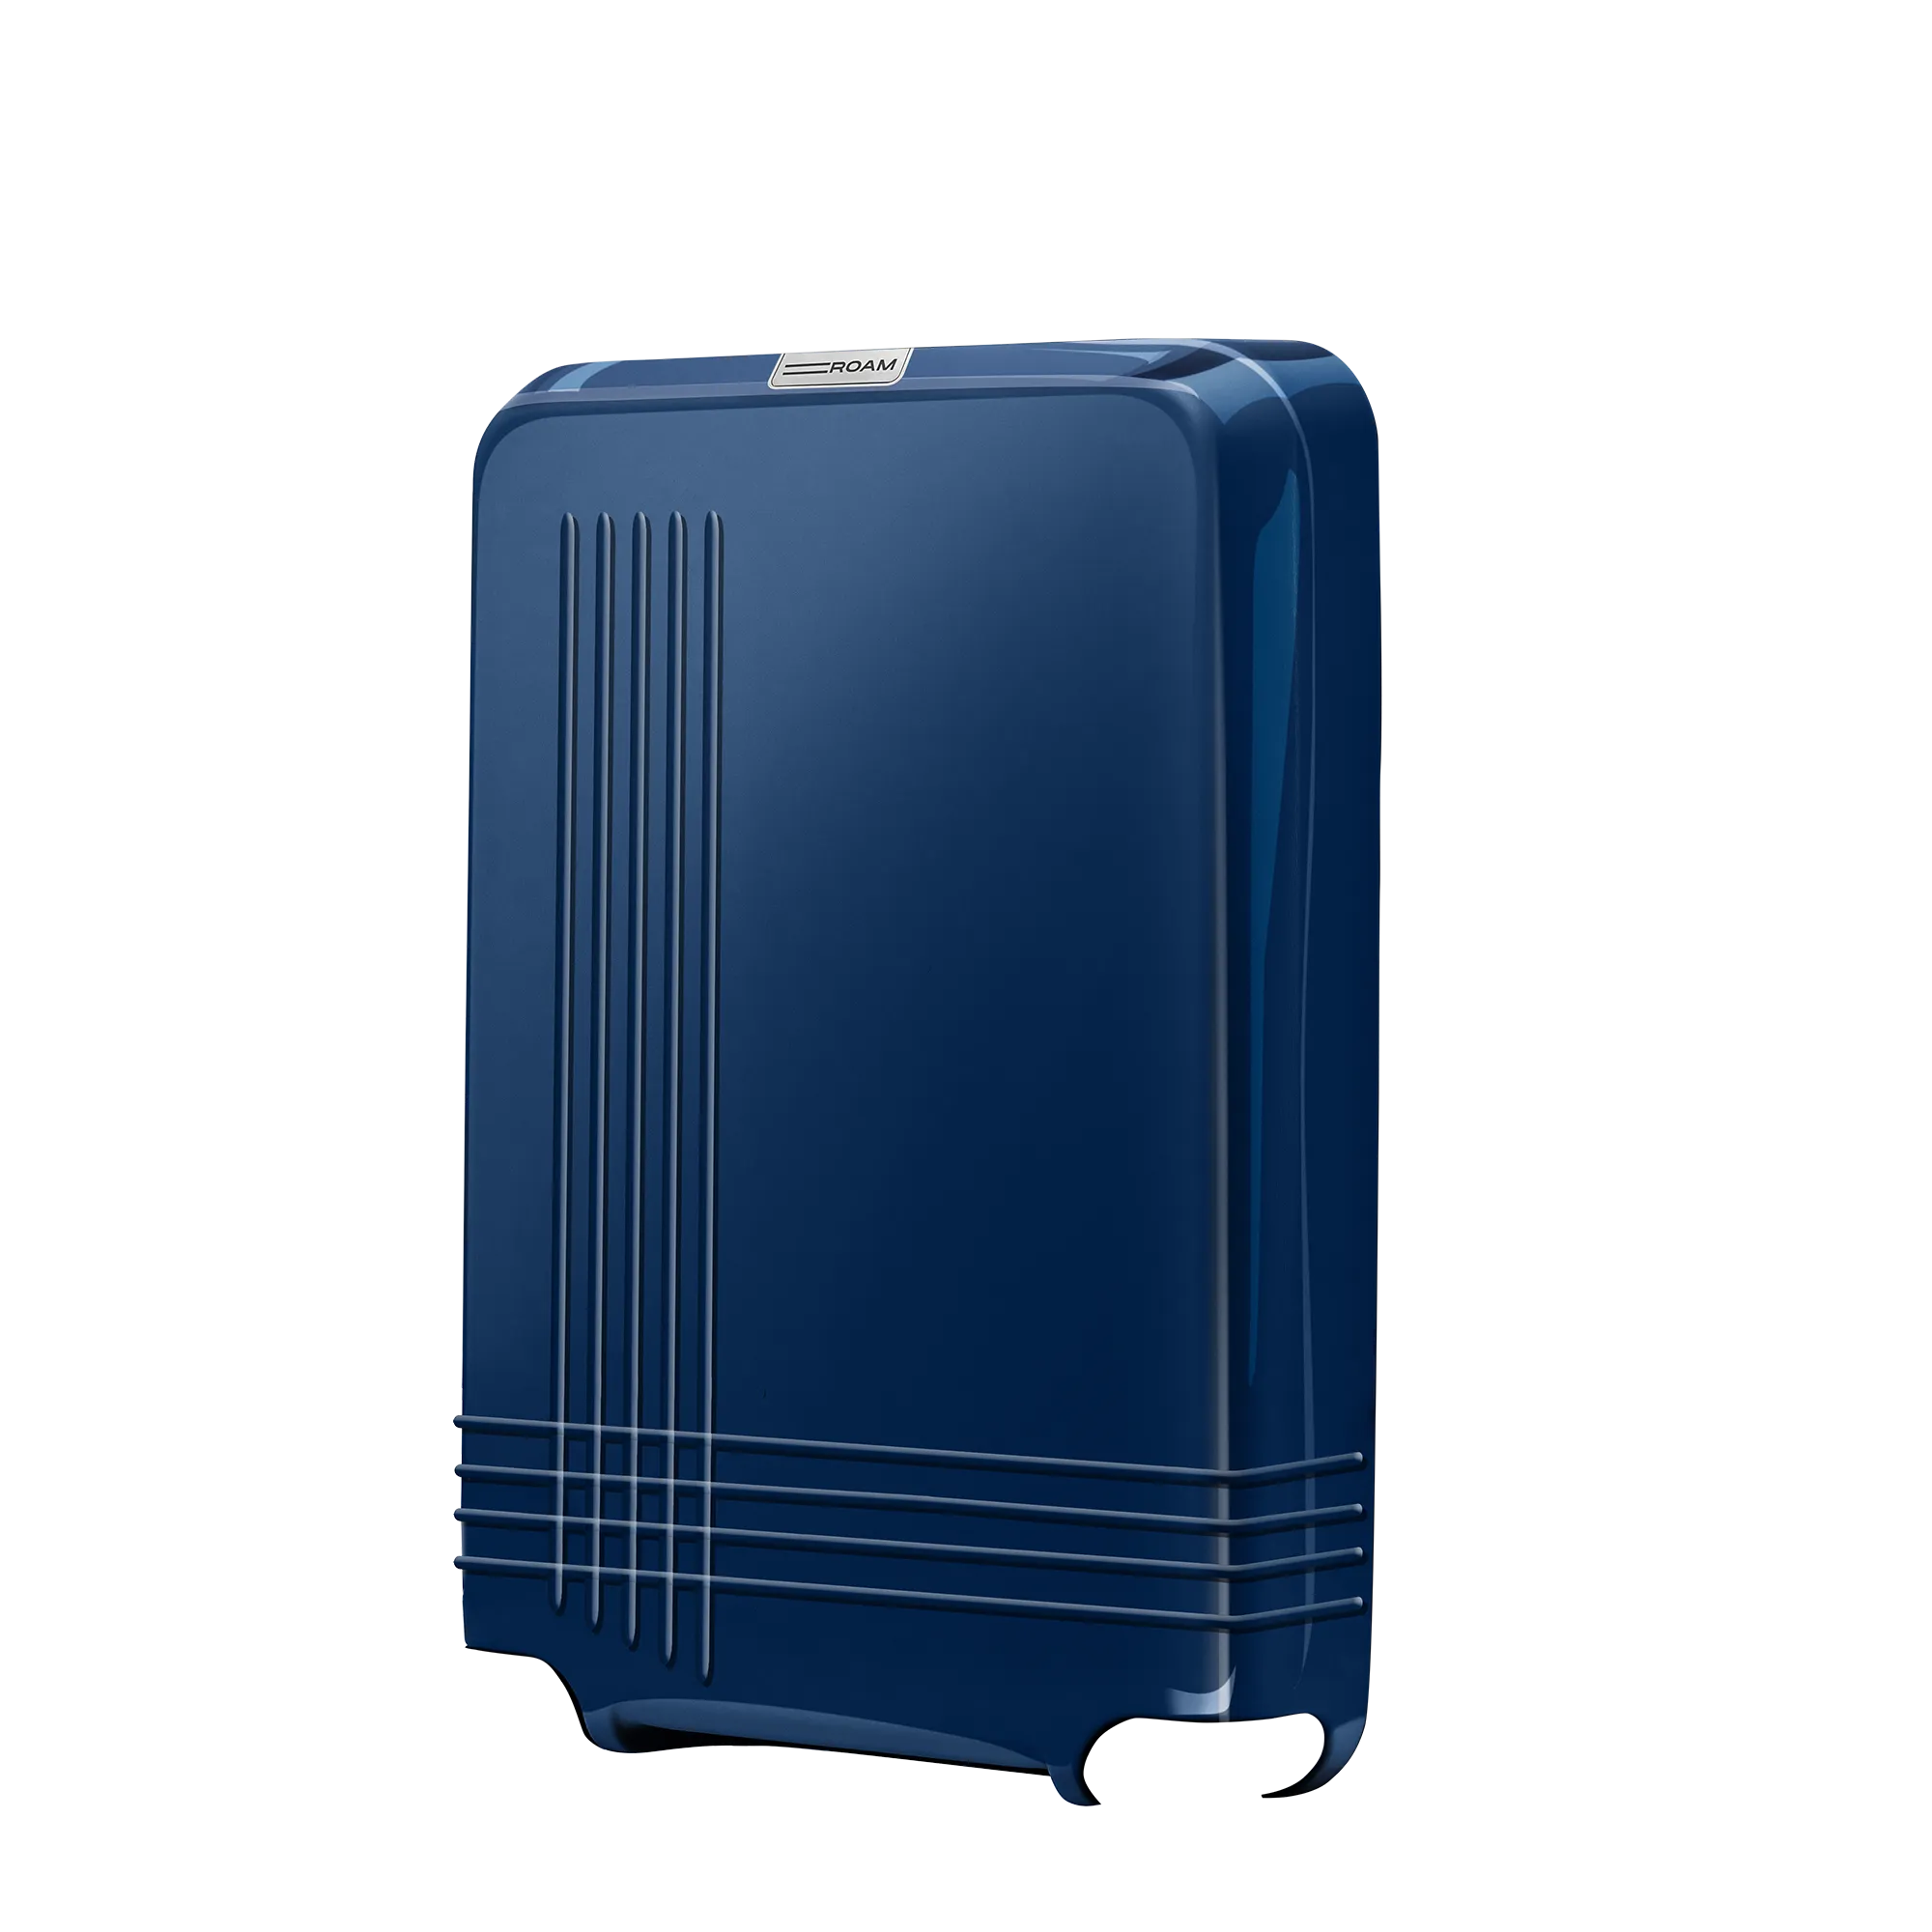 luggage large check in front shell in glossy navy